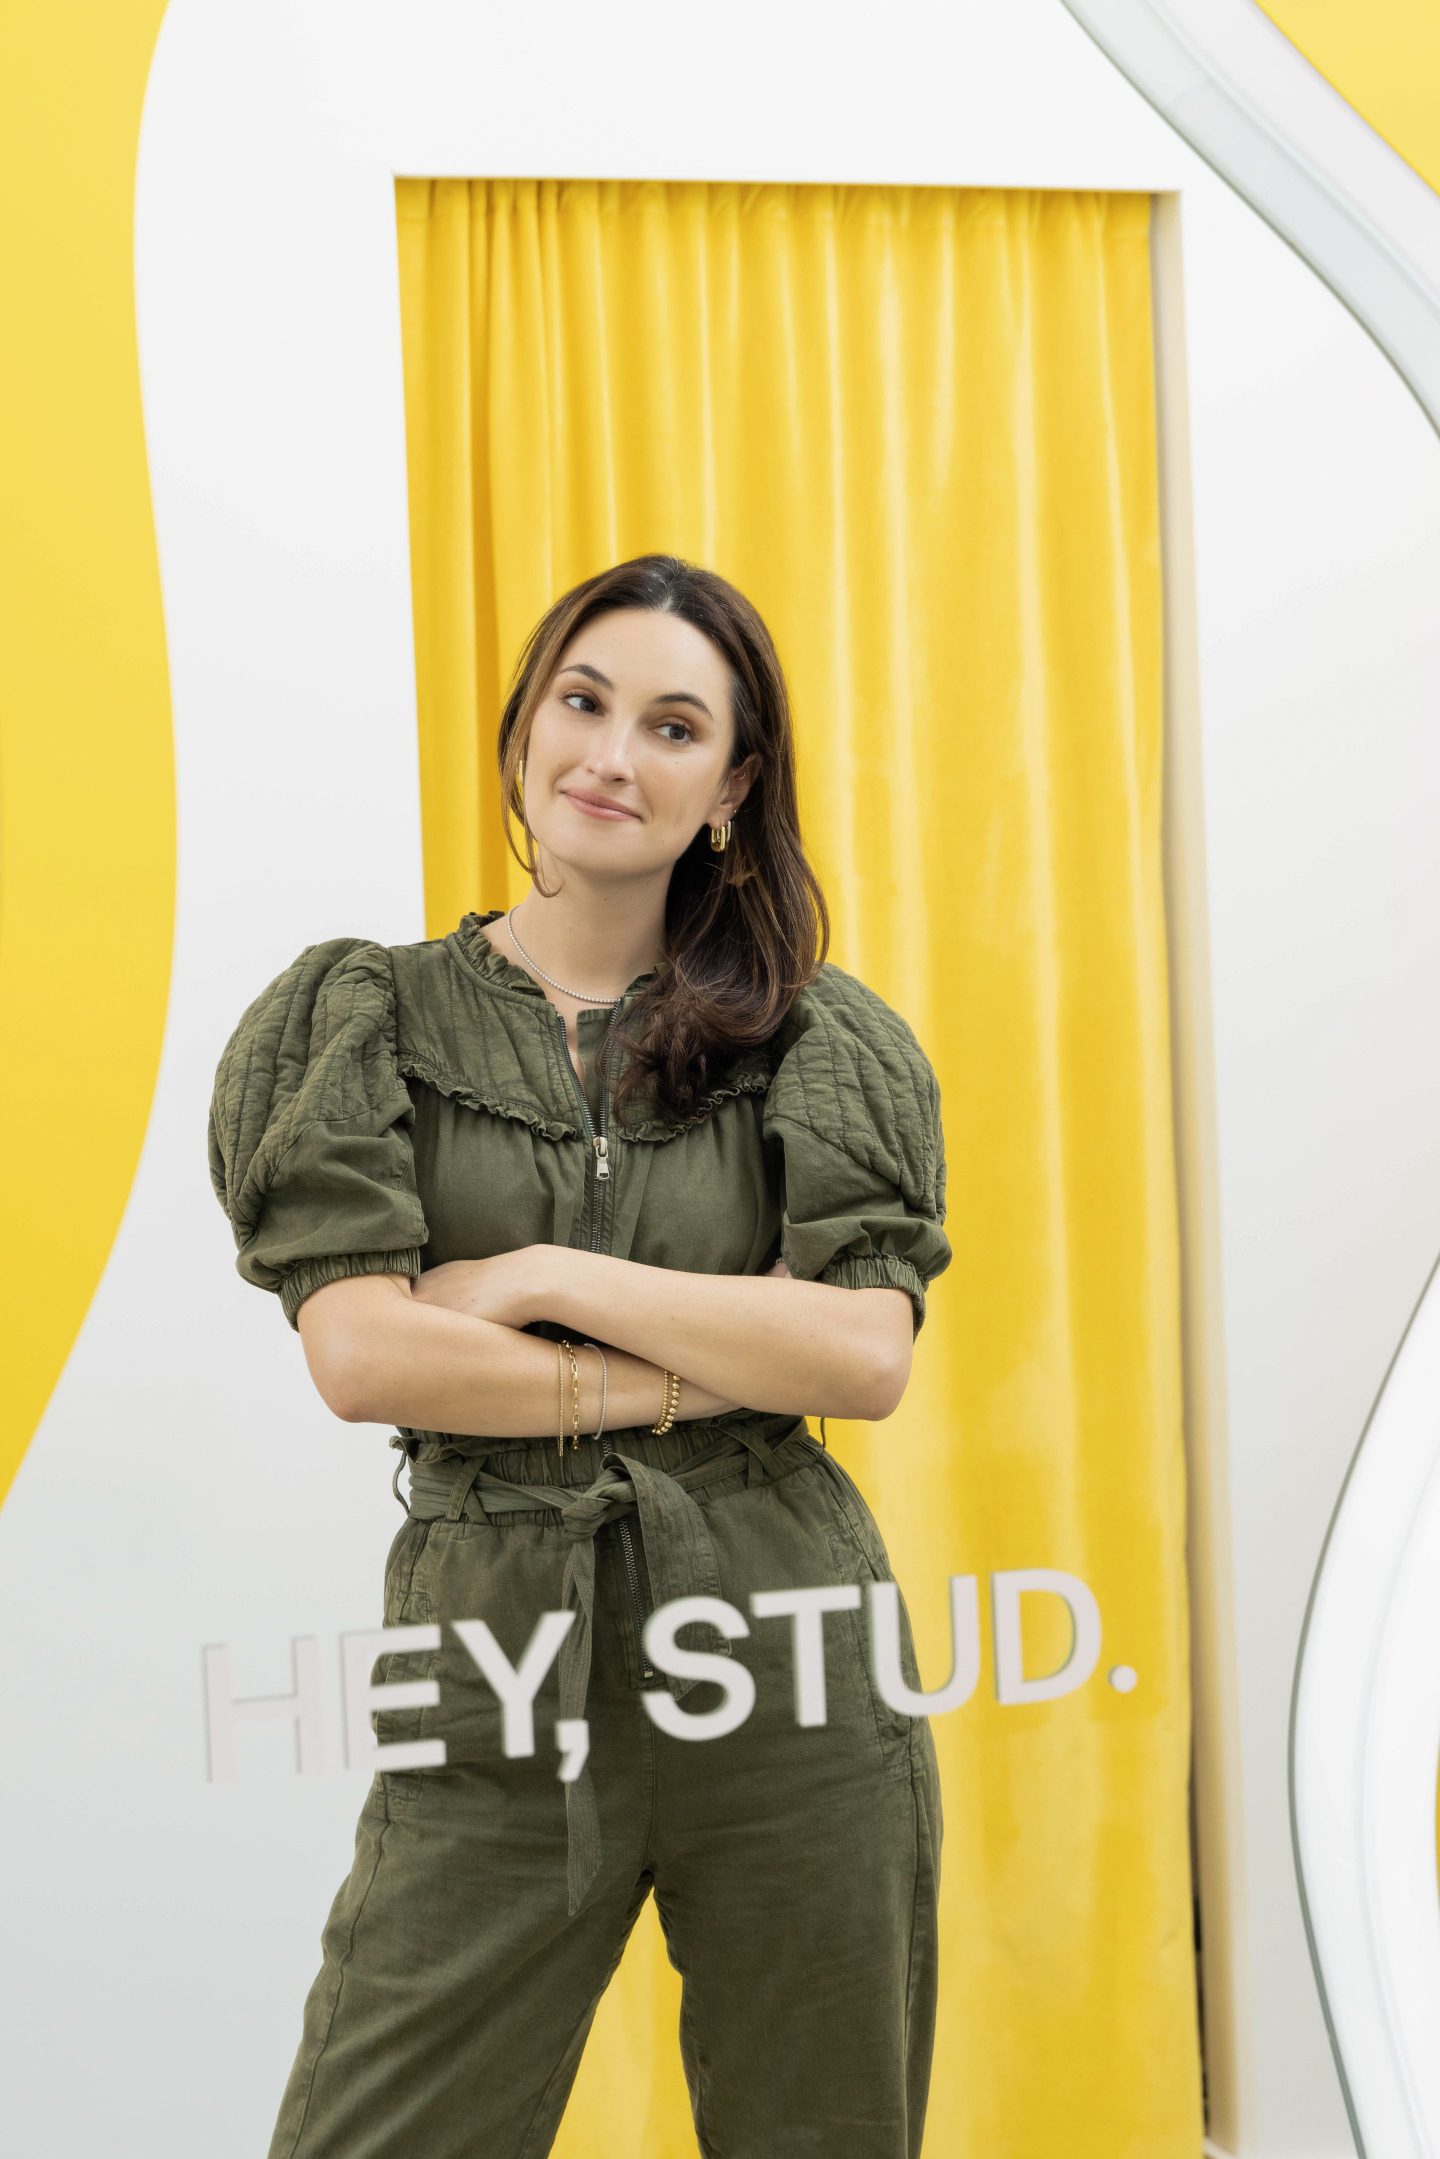 Studs founder Anna Harman in front of a yellow curtain